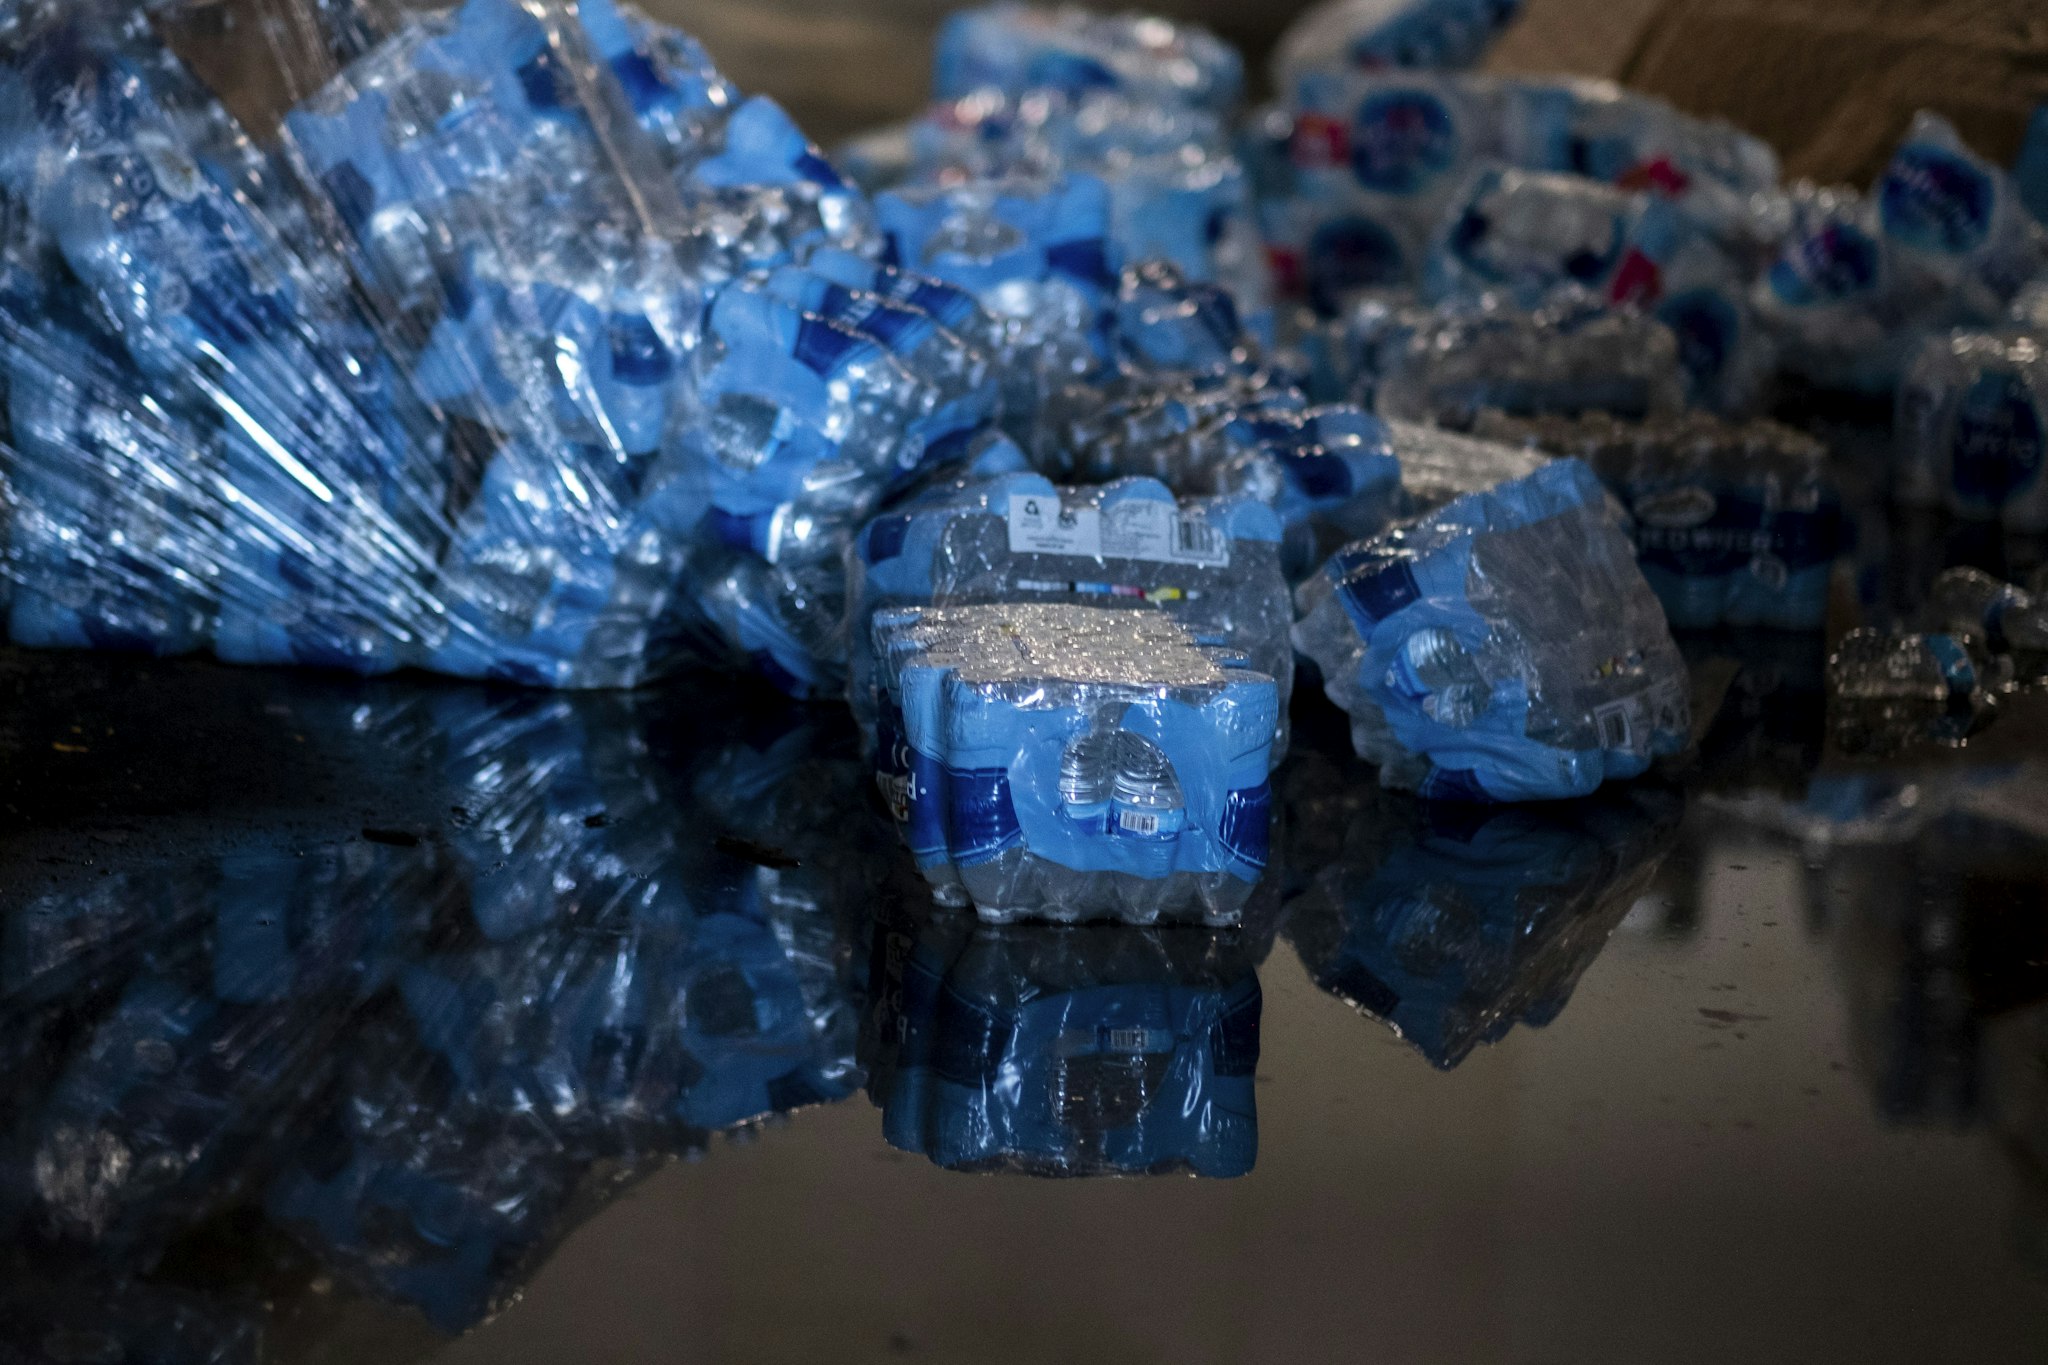 Bottled water believed to have been from when Hurricane Maria struck the island in 2017 is seen in a warehouse in Ponce, Puerto Rico on January 18, 2020, after a powerful earthquake hit the island. - President Donald Trump on January 16 freed up emergency aid for Puerto Rico's recovery from a January 7 earthquake that caused widespread disruption and damage on the island. Trump's declaration of a major disaster in Puerto Rico makes federal funding available for repairs, temporary housing and low-cost loans "to help individuals and business owners recover from the effects of the disaster," the White House said. (Photo by Ricardo ARDUENGO / AFP) (Photo by RICARDO ARDUENGO/AFP via Getty Images)